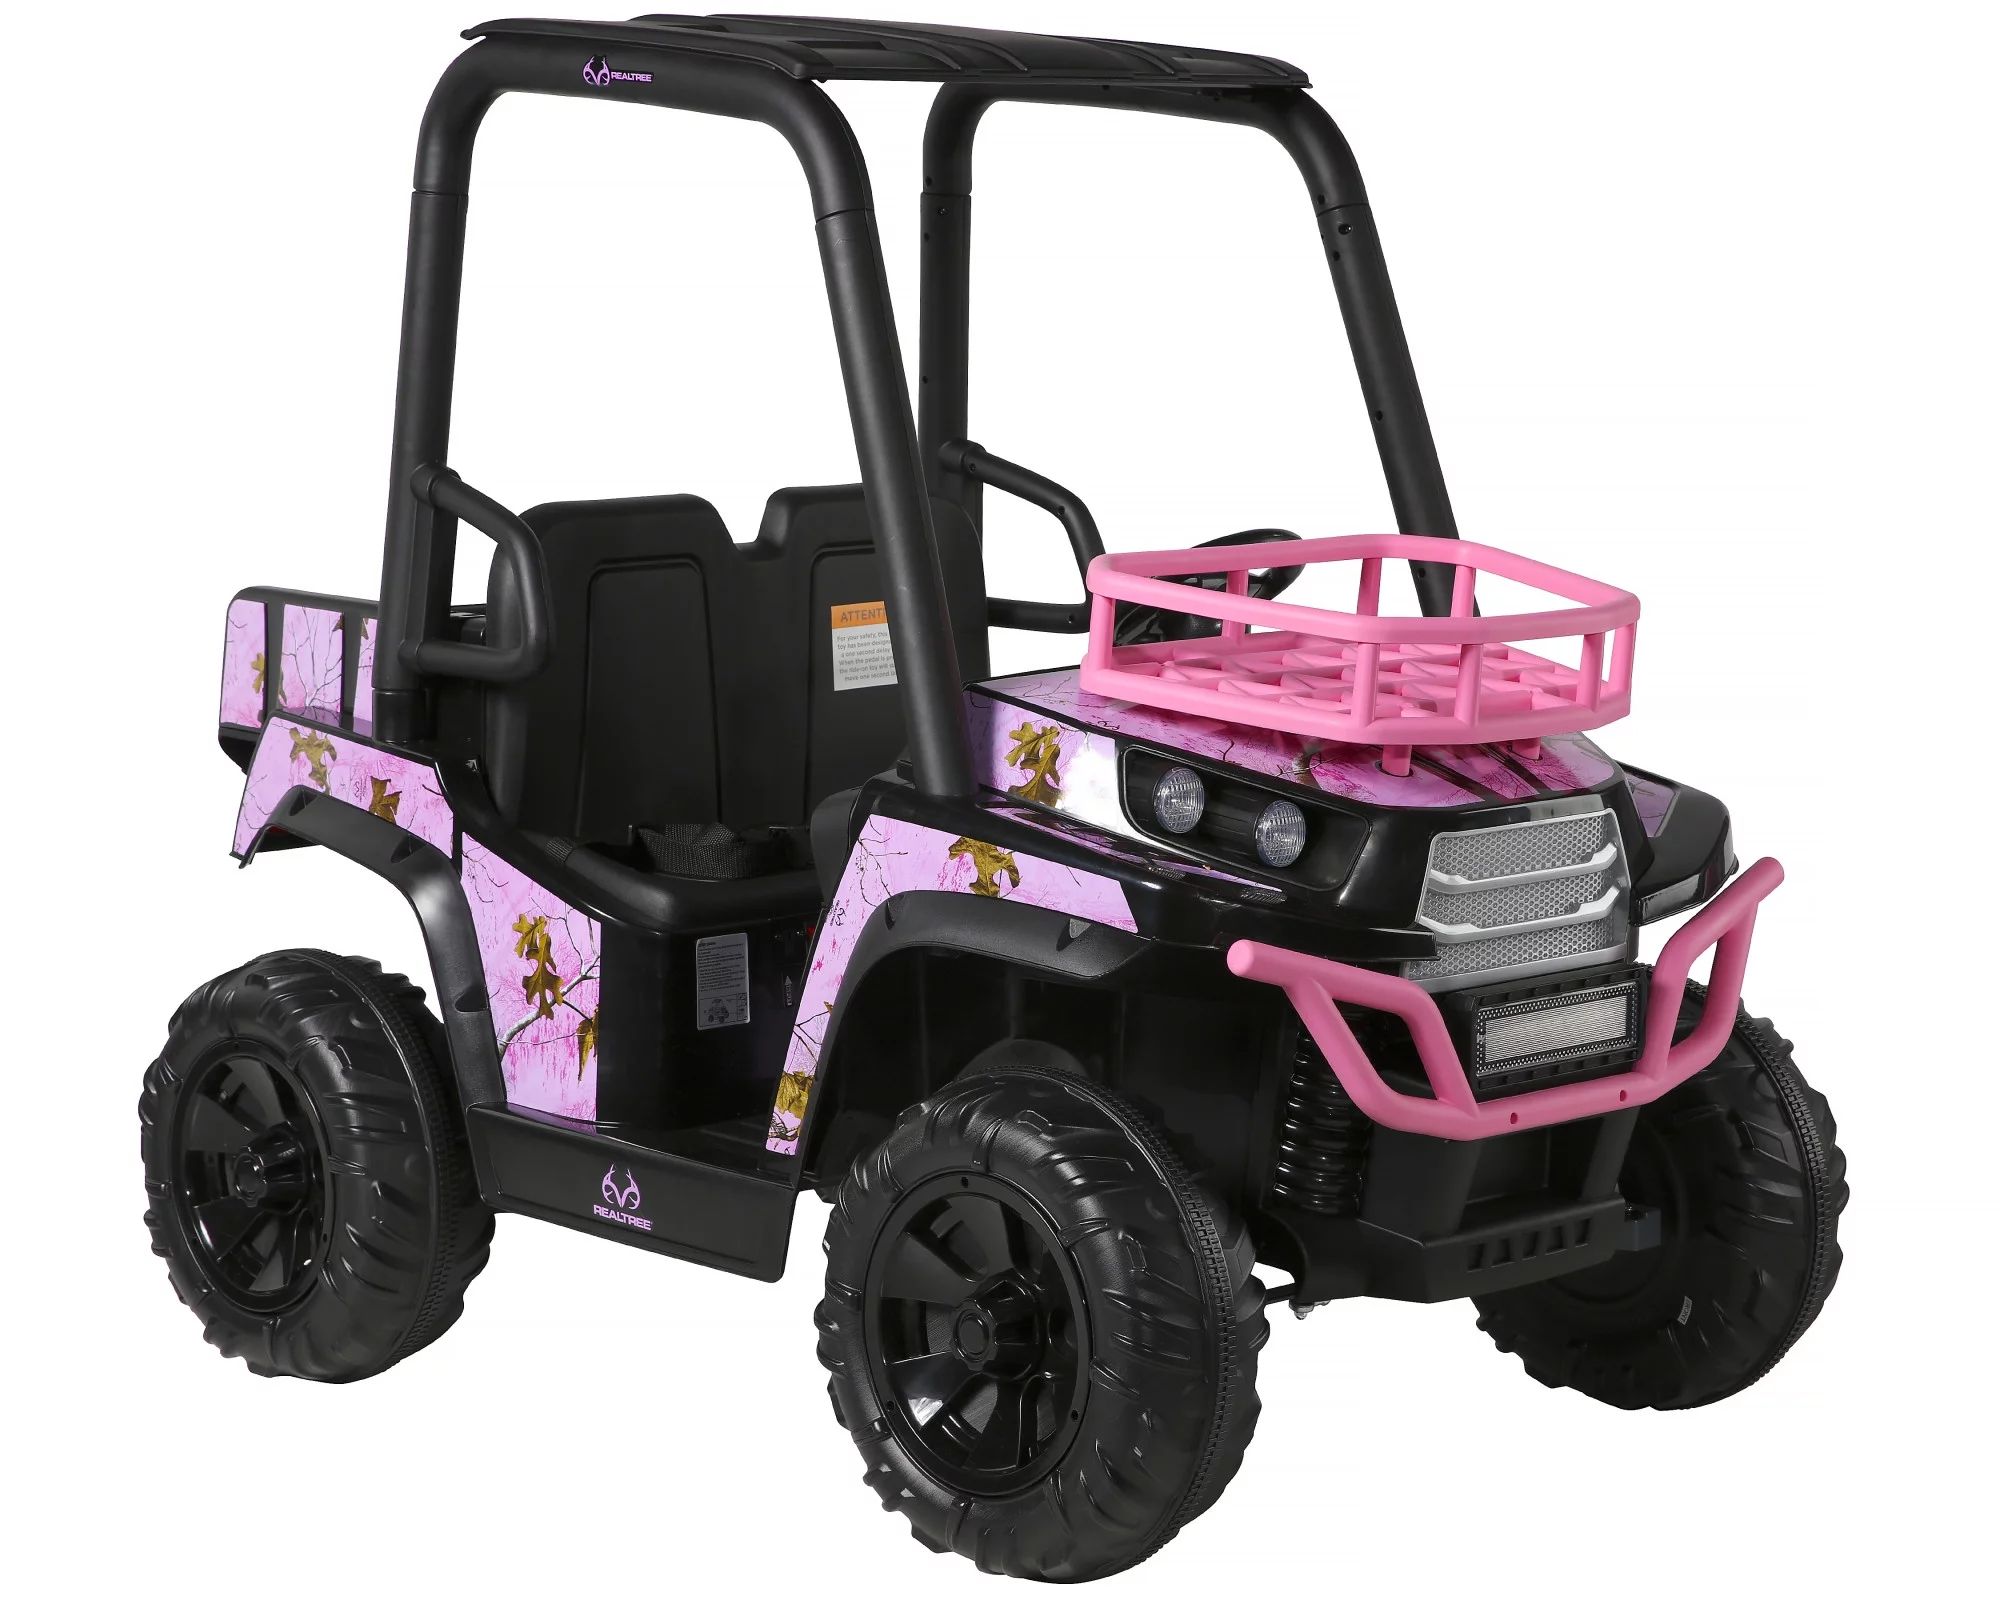 Dynacraft Realtree 24-Volt Girls Kids Ride-on For Age 3-5 Years | Walmart (US)